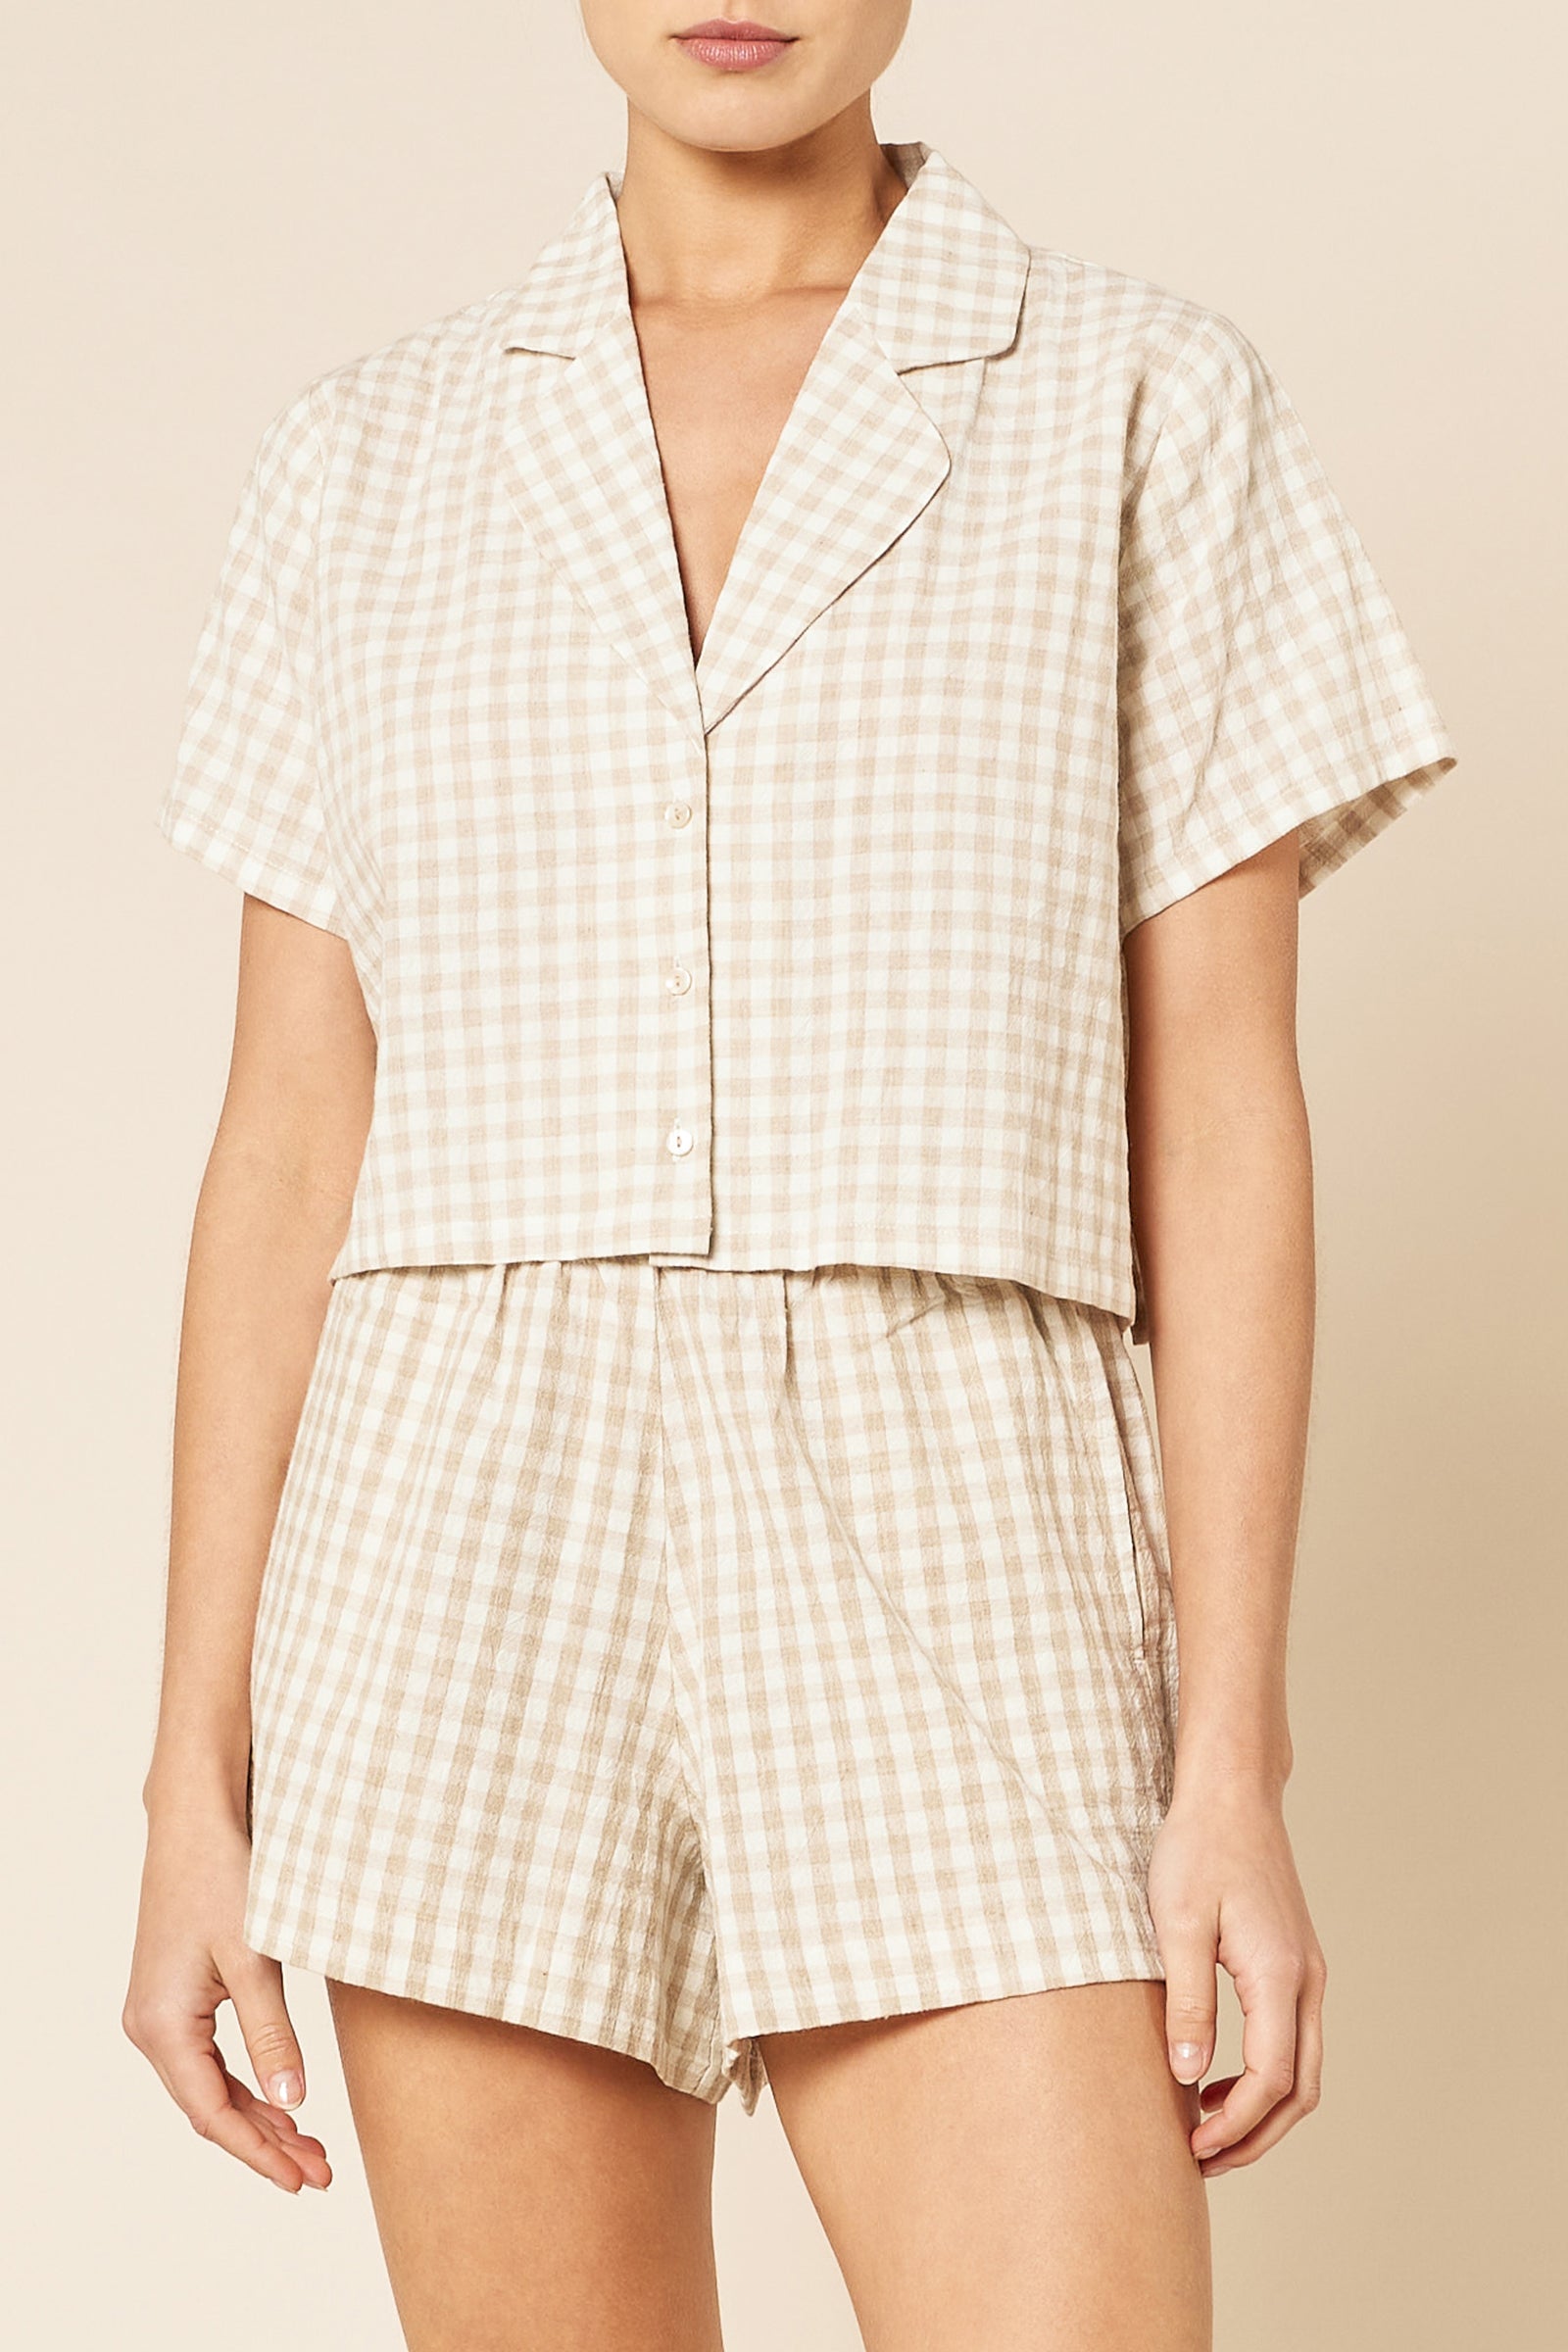 Nude Lucy Clive Check Shirt in Check